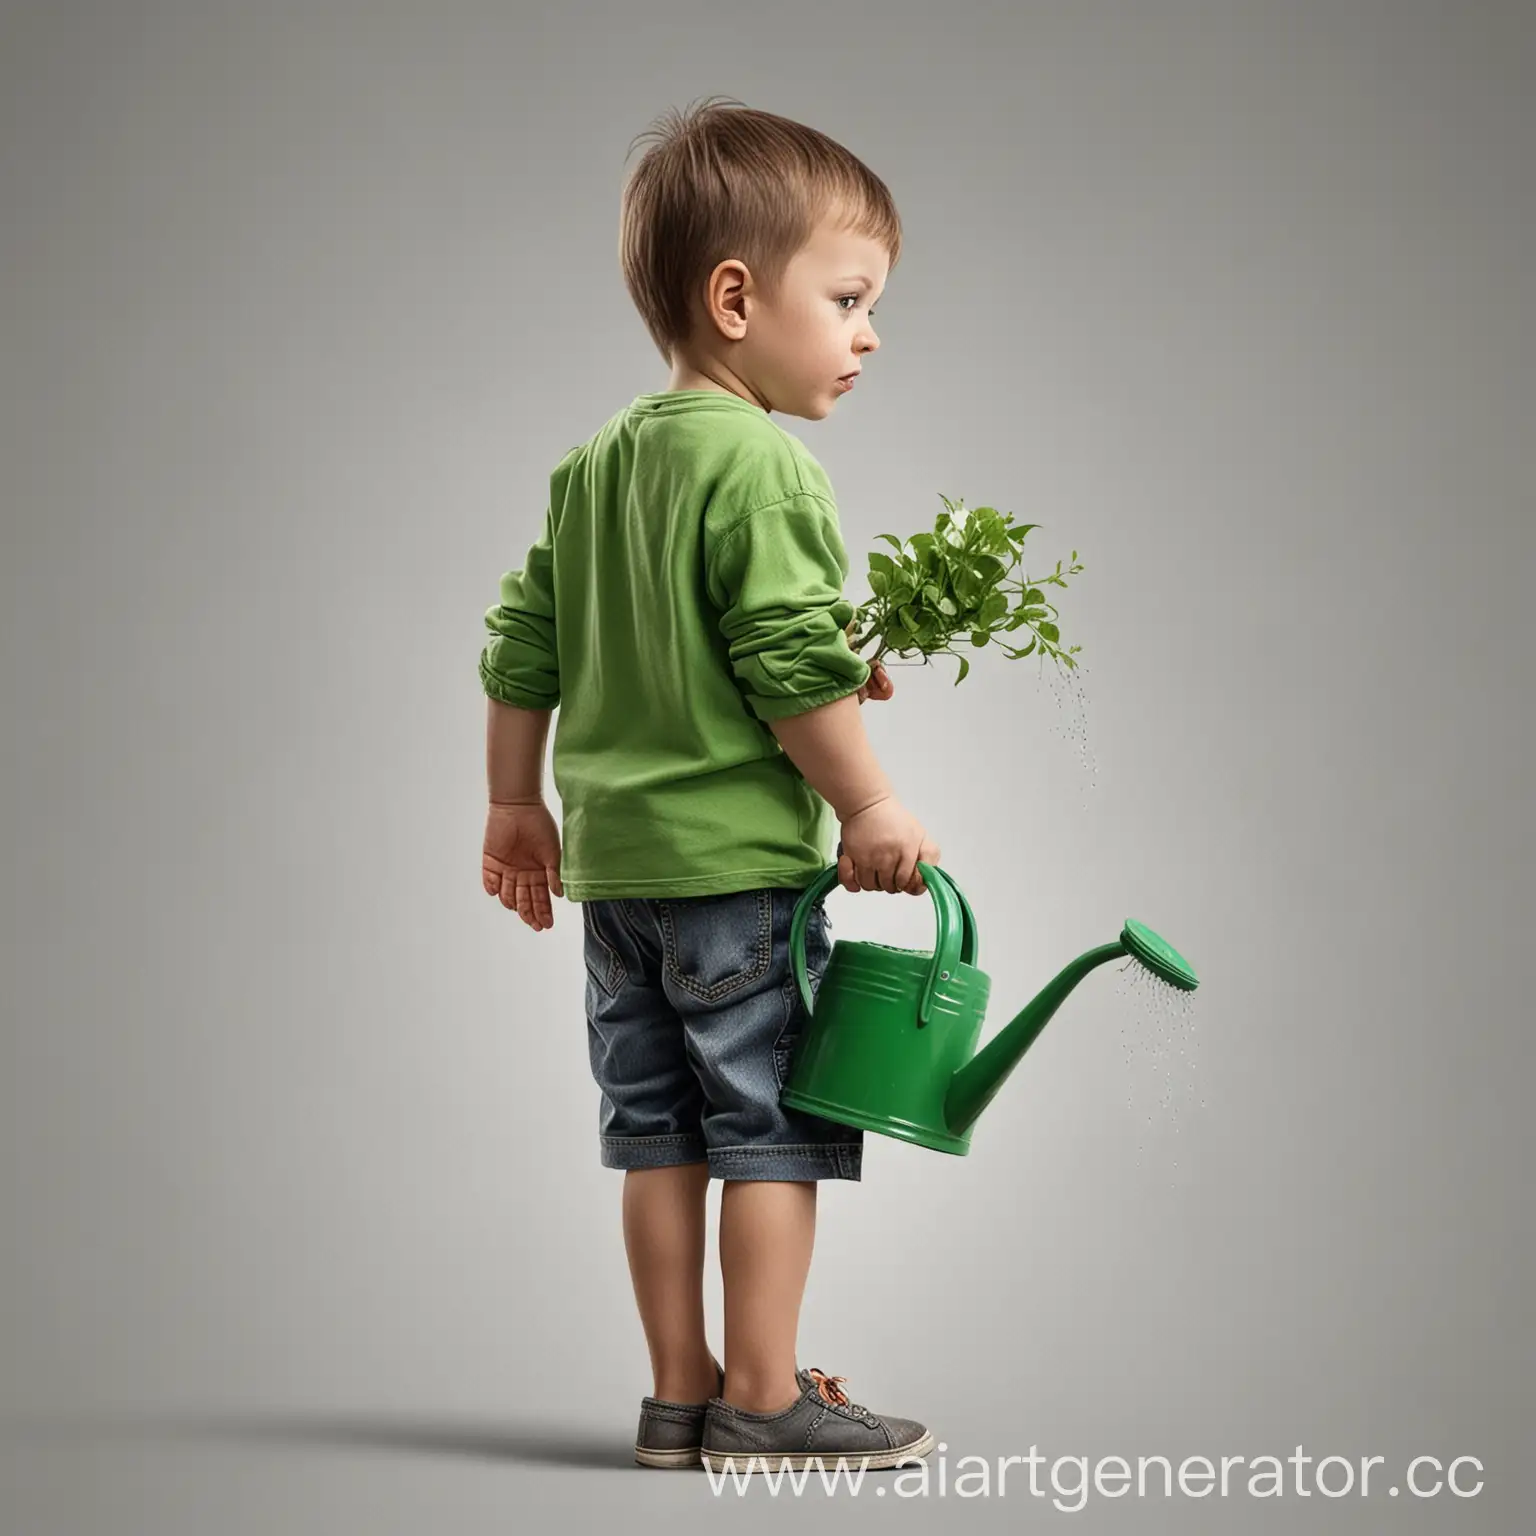 Realistic-Little-Boy-with-Green-Watering-Can-Profile-Portrait